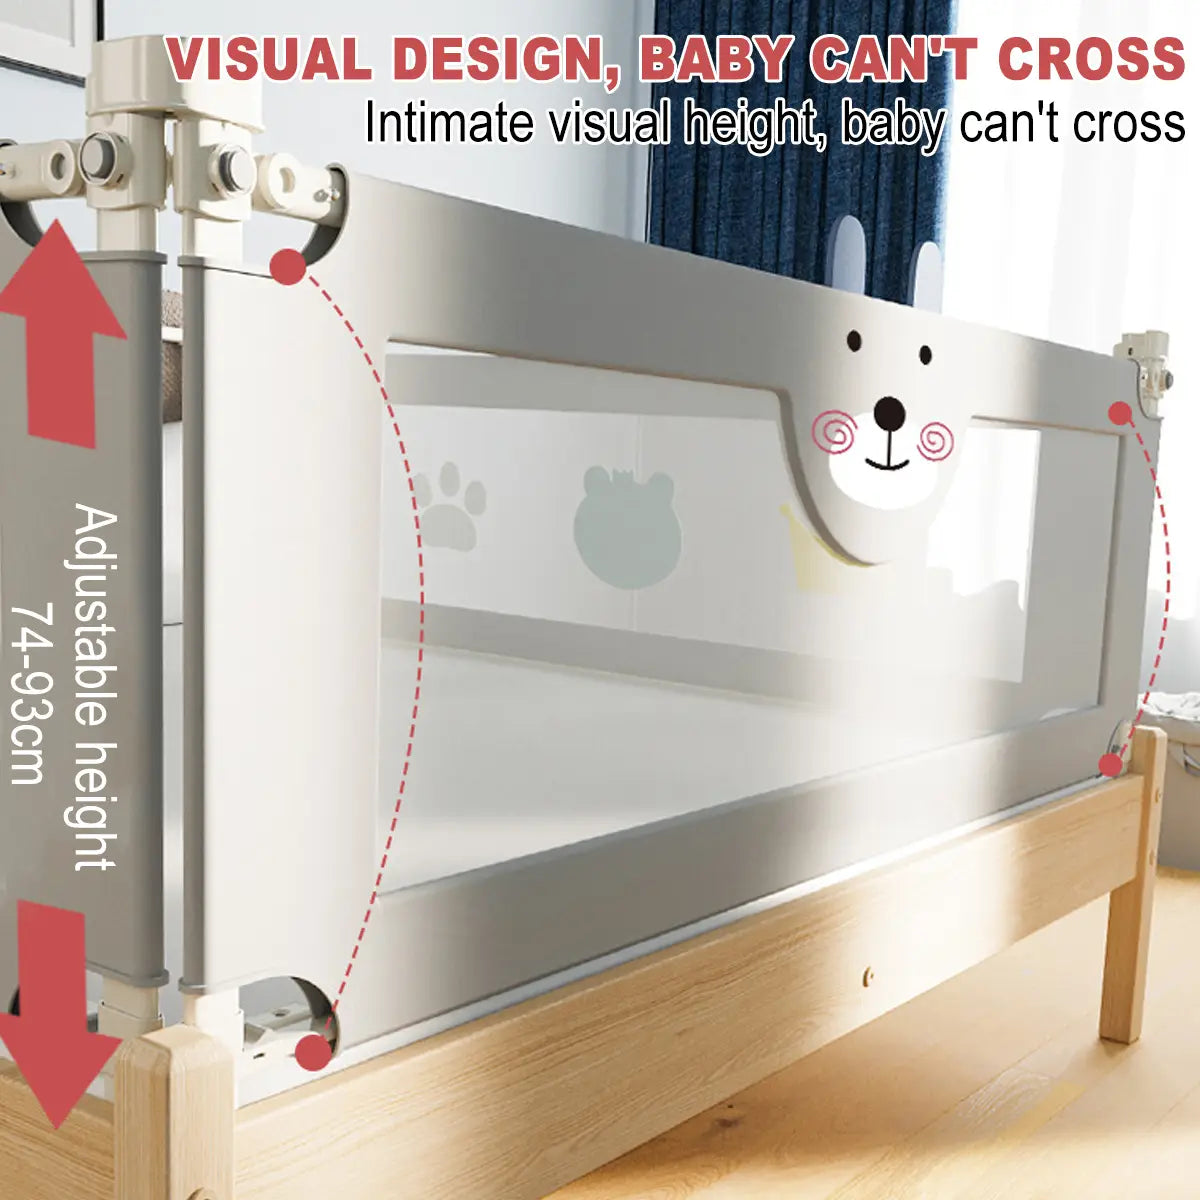 100cm Height Bed Rail/bedrail Kids Safety Cot Guard Protecte